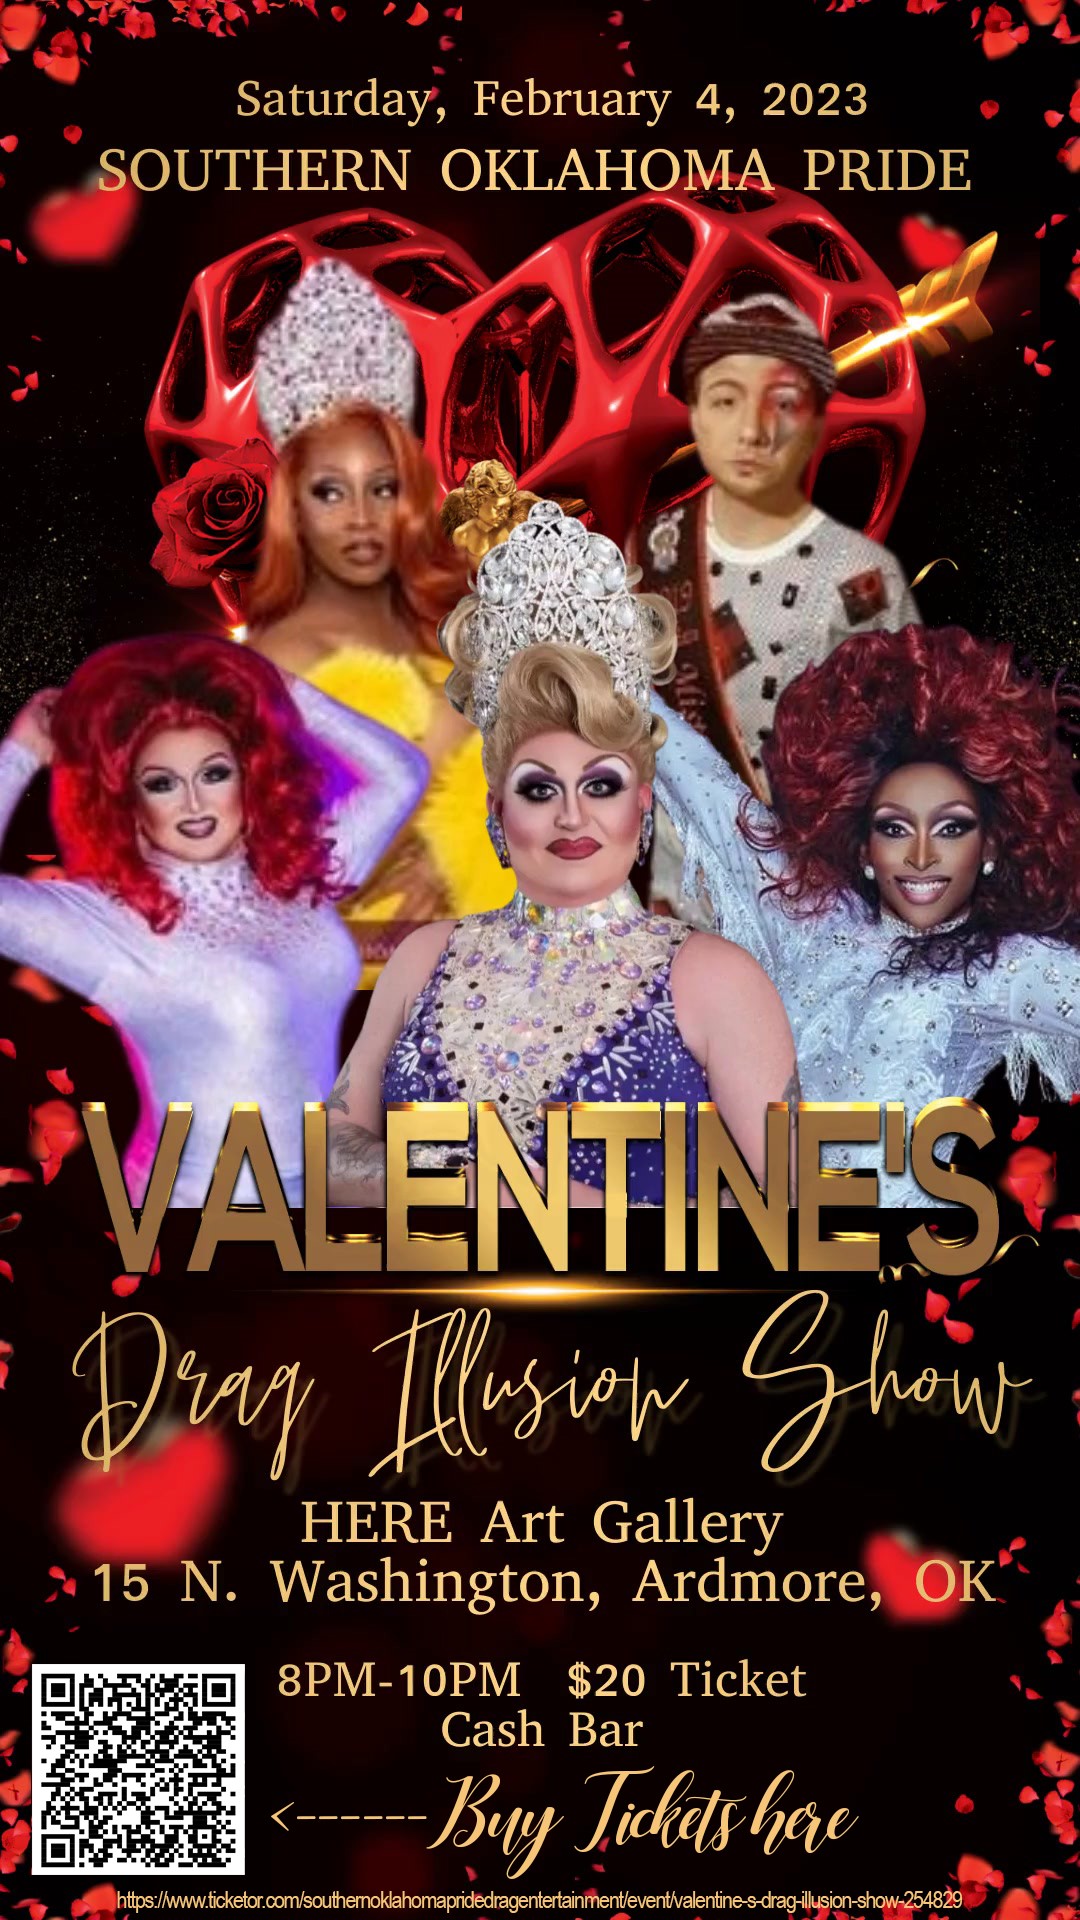 Valentine's Drag Illusion Show with Shantel Mandalay & Company; hosted by Southern Oklahoma Pride on Feb 04, 20:00@HERE Art Gallery - Buy tickets and Get information on Southern Oklahoma Pride Event, 